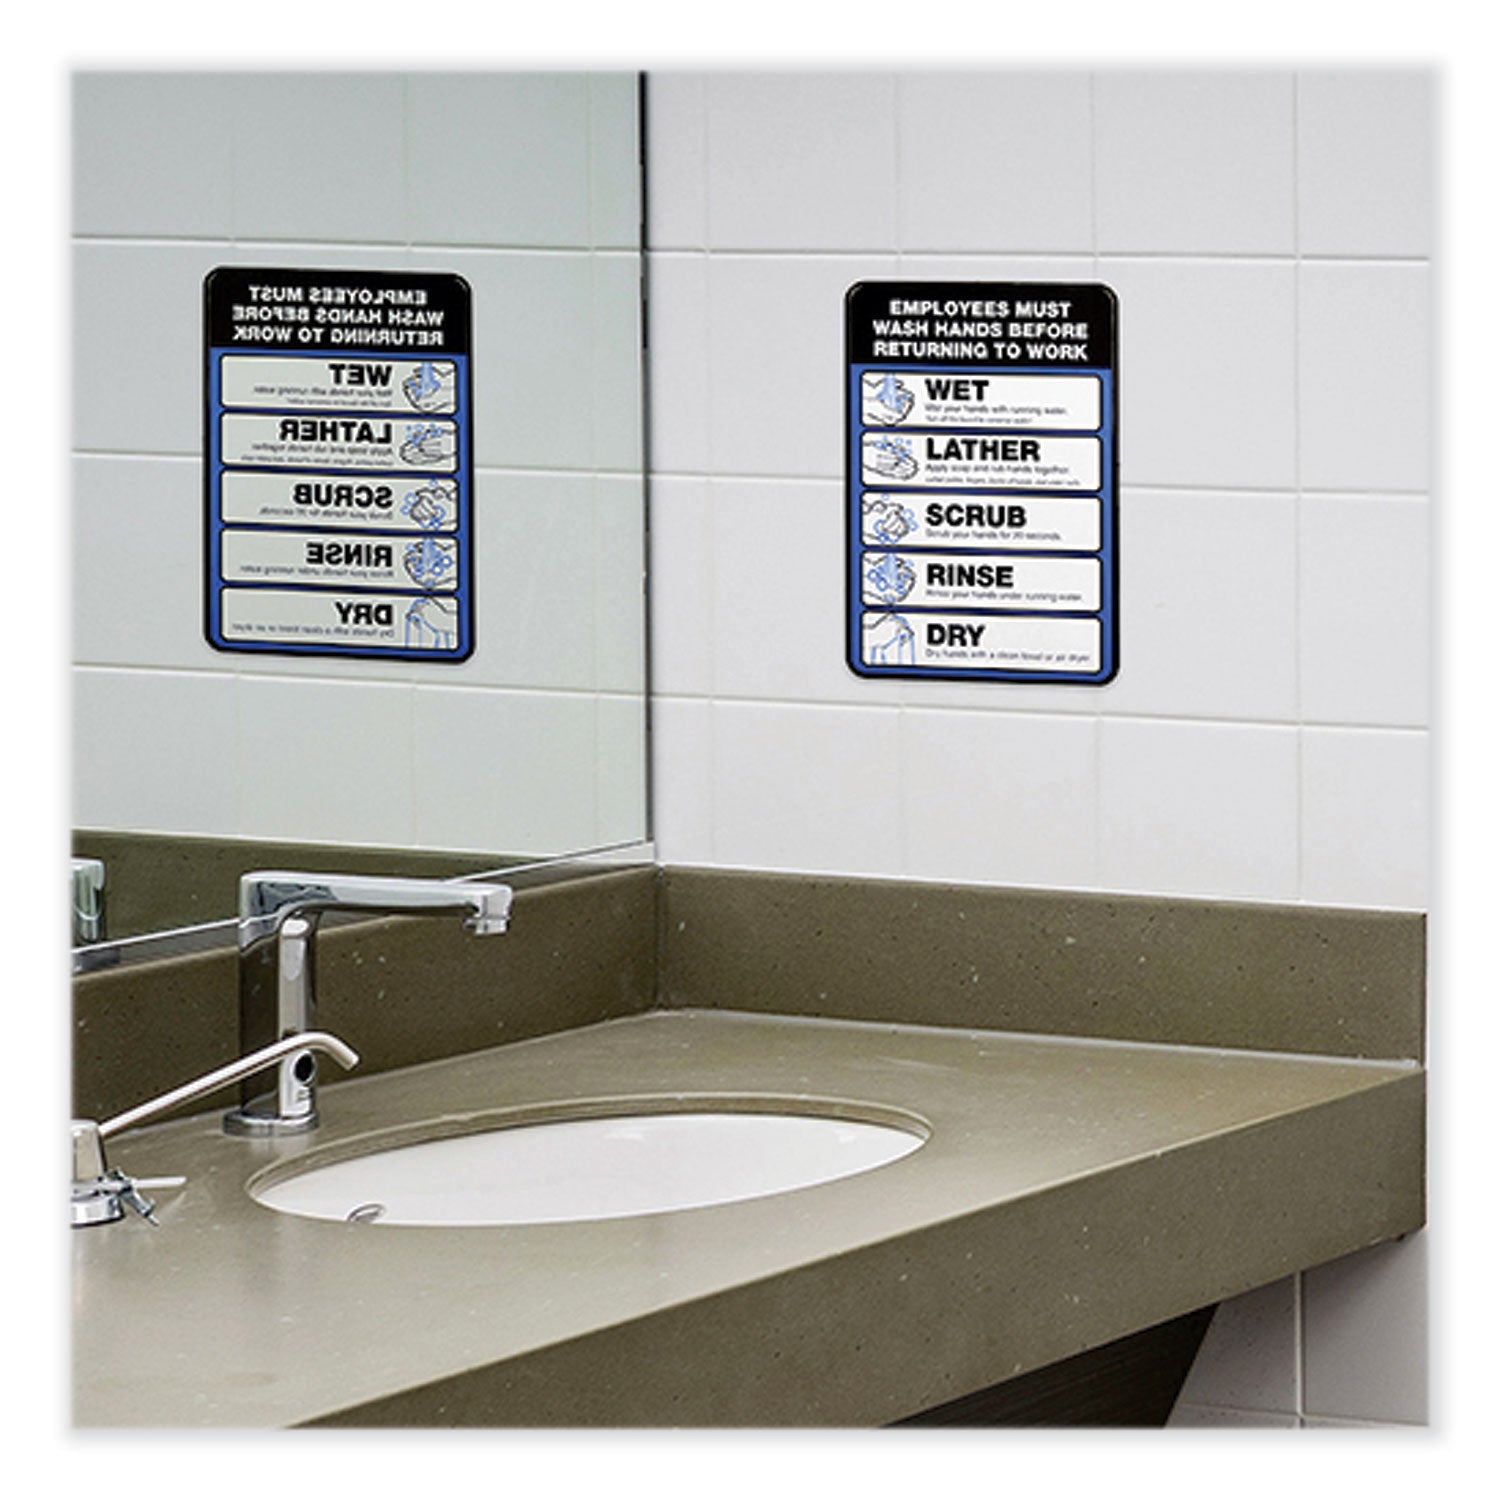 employees-must-wash-hands-indoor-wall-sign-5-x-7-black-blue-white-face-black-blue-graphics-2-pack_exohd0171s - 4